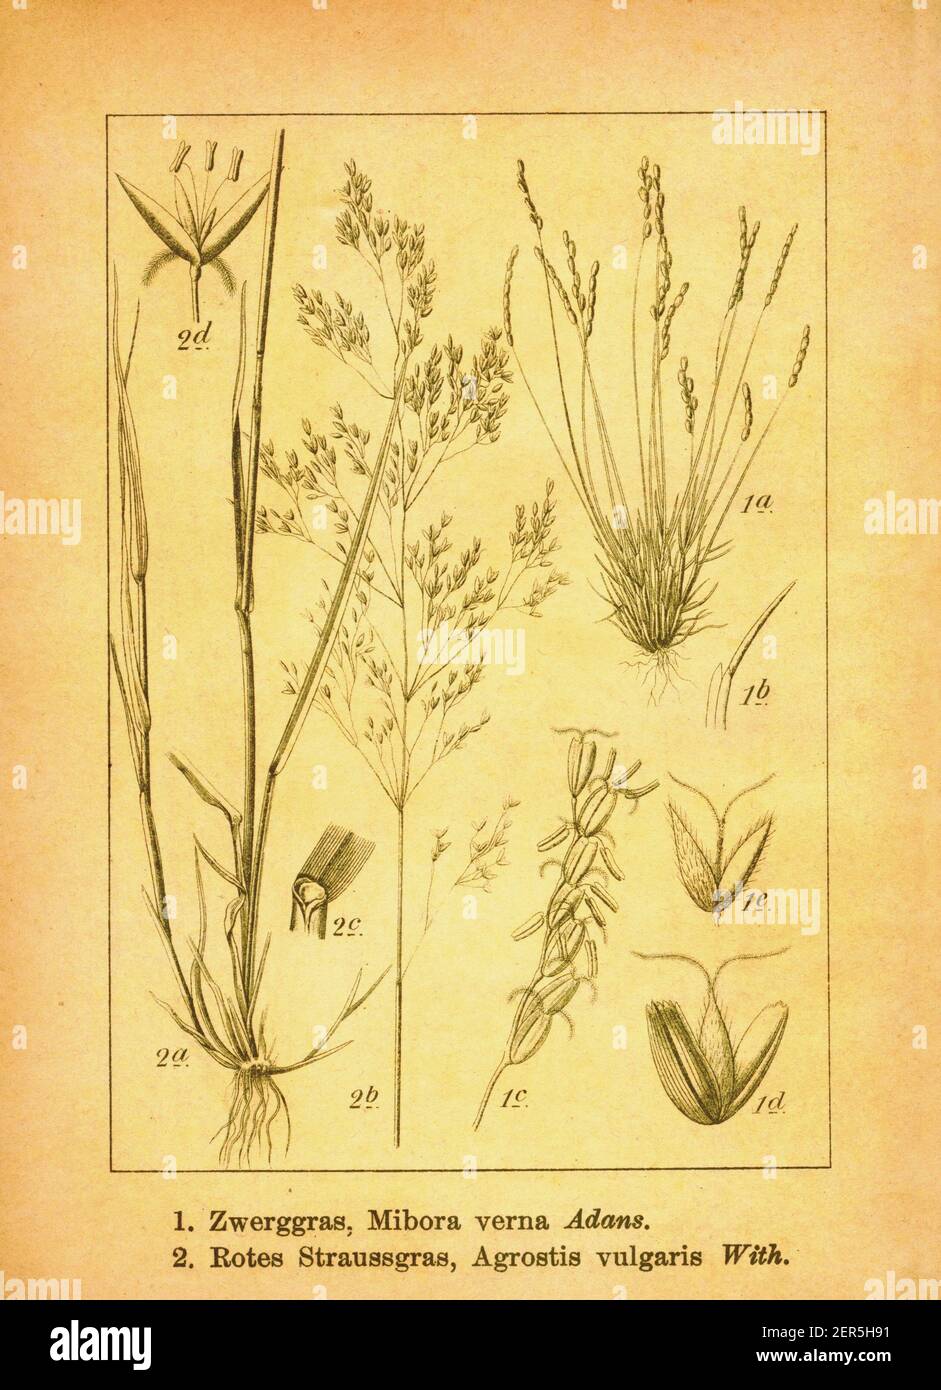 Antique 19th-century illustration of sandgrass and colonial bentgrass. Engraving by Jacob Sturm (1771-1848) from the book Deutschlands Flora in Abbild Stock Photo